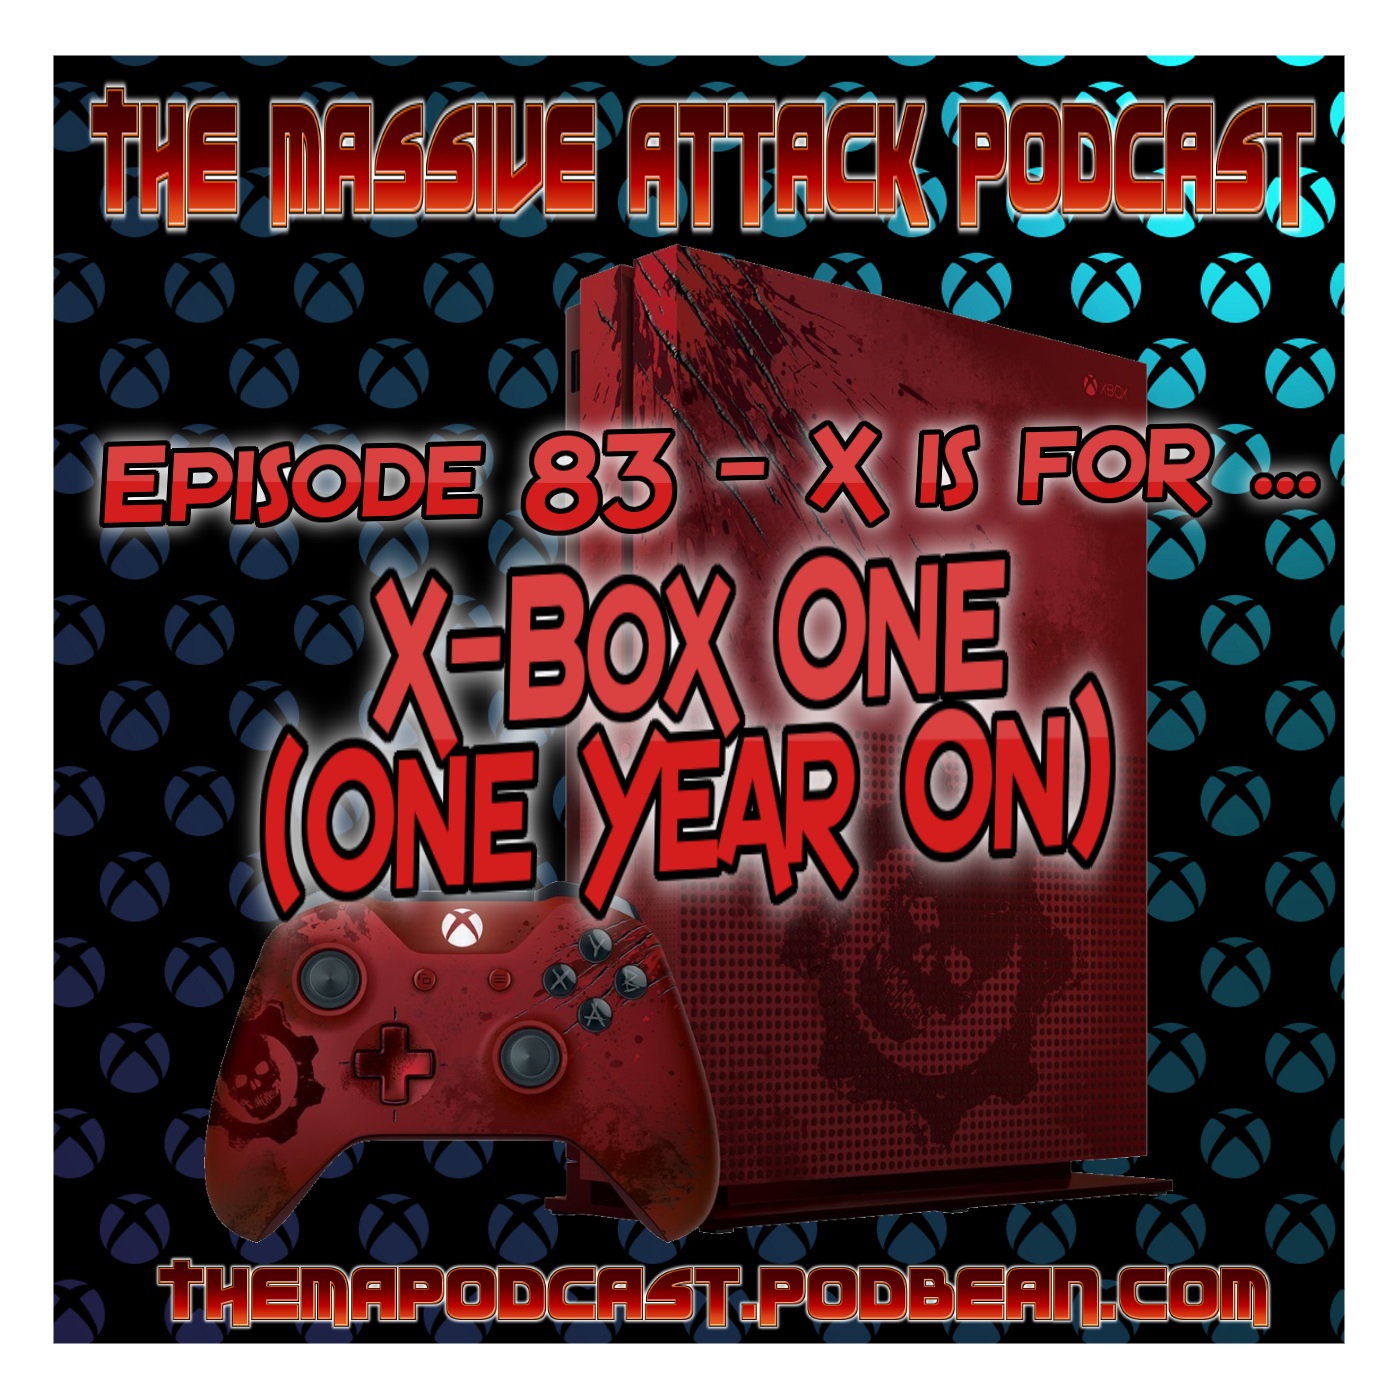 Episode 83 - X is for Xbox One (One Year On)!